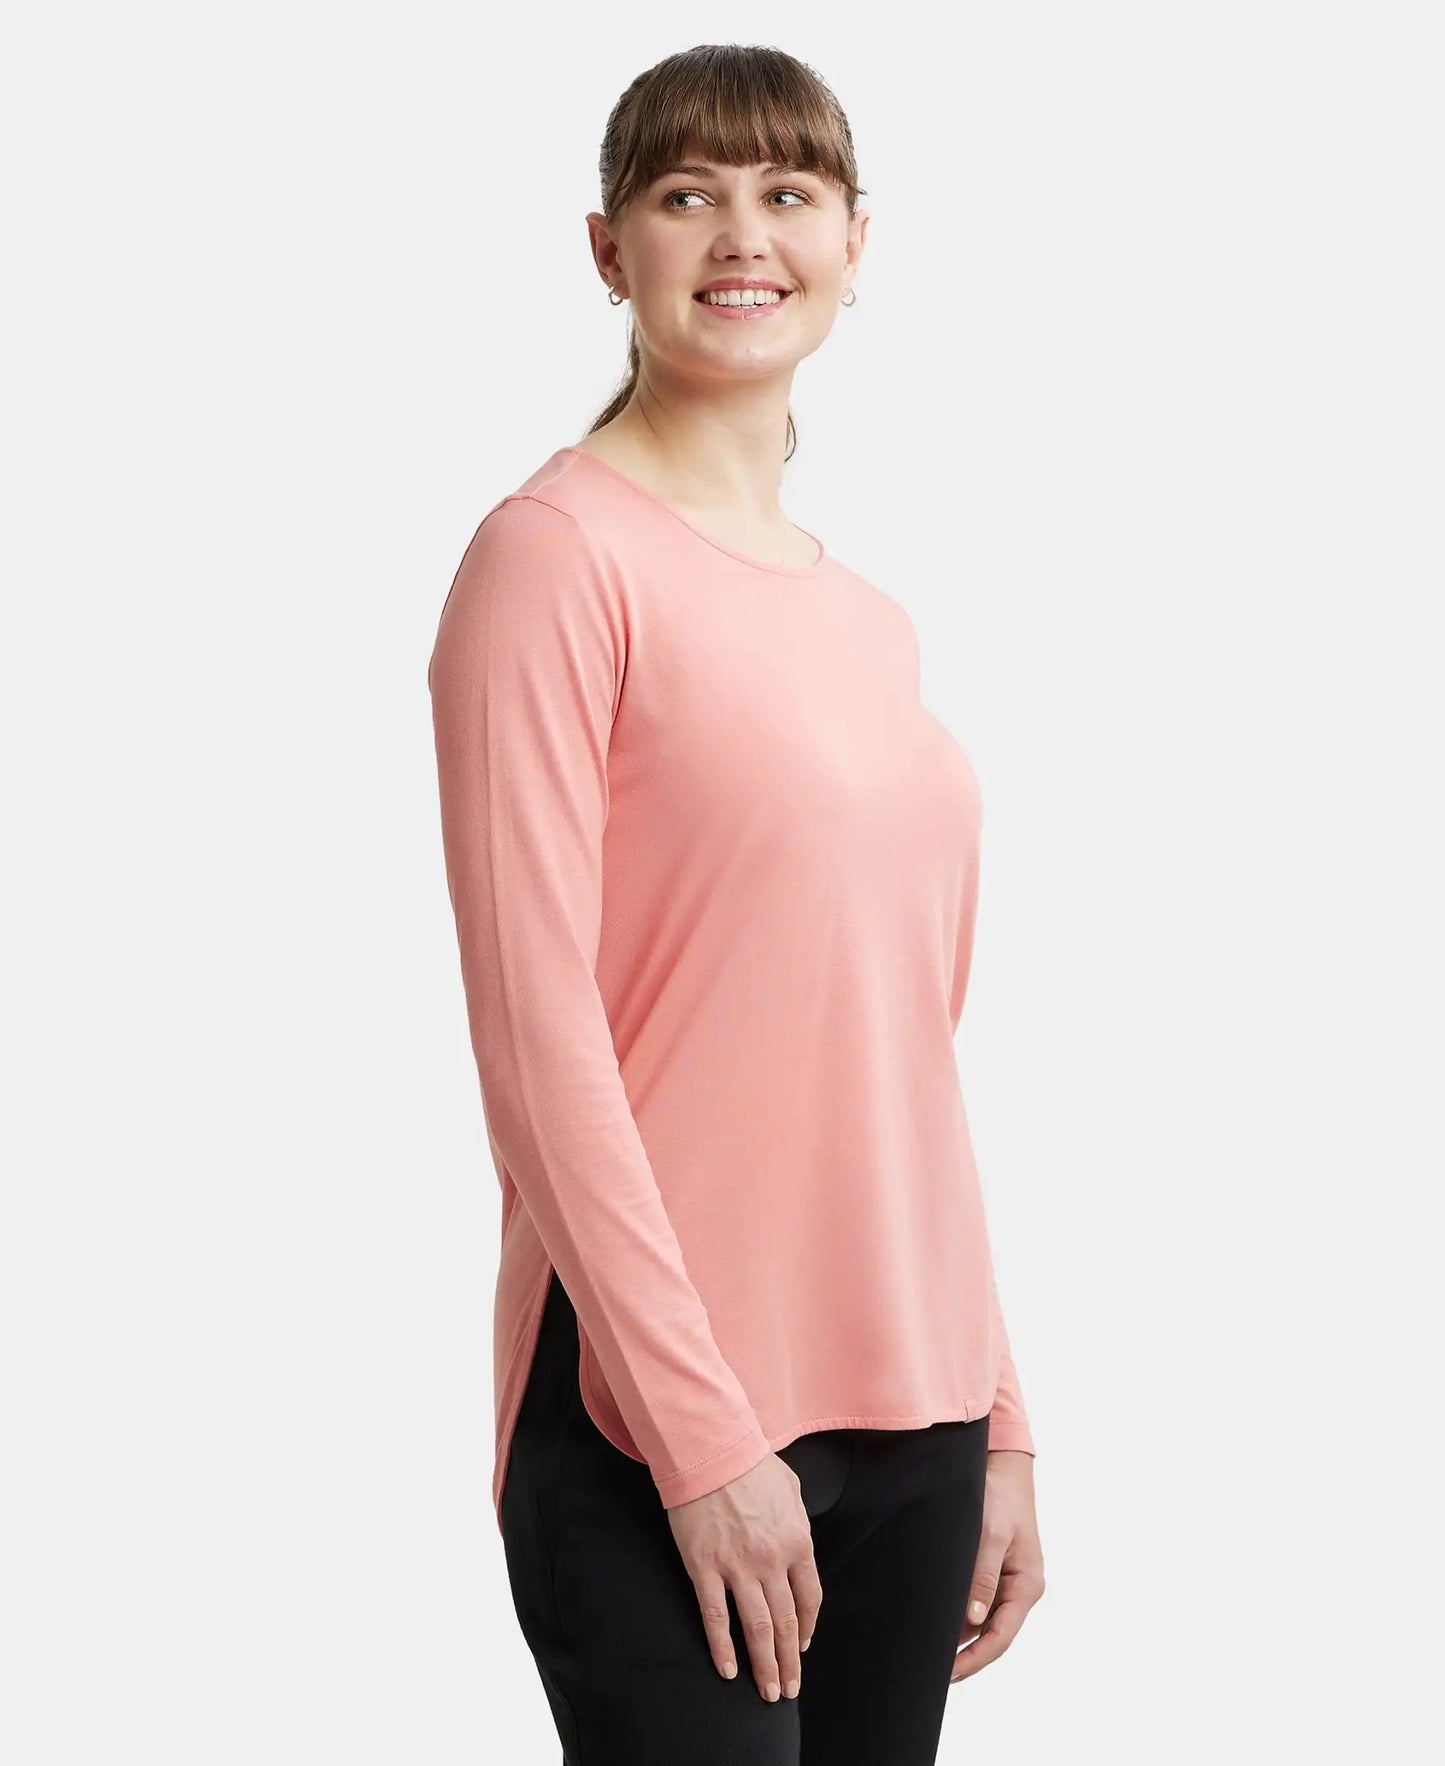 Micro Modal Cotton Relaxed Fit Solid Round Neck Full Sleeve T-Shirt with Curved Hem Styling - Peach Blossom-2